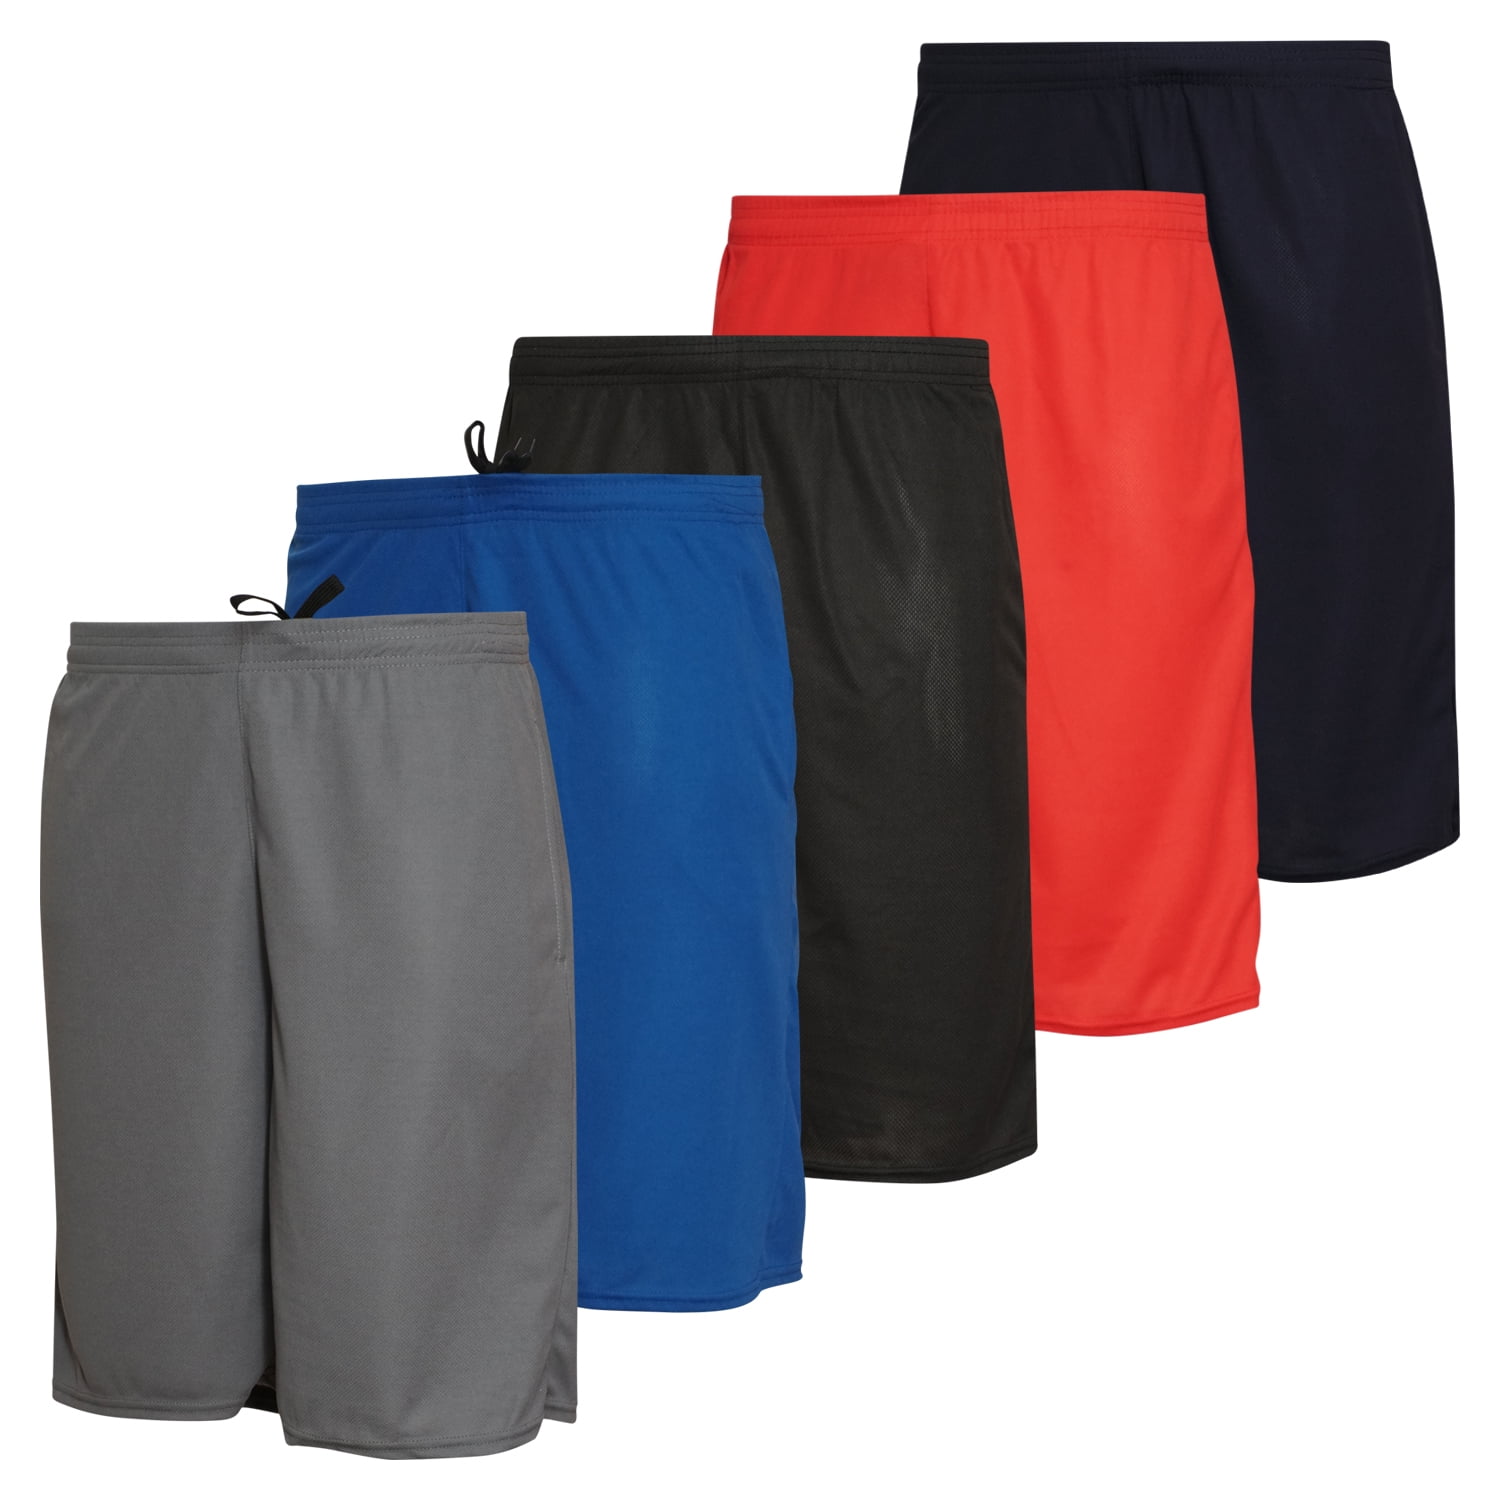 Real Essentials Boys Mesh Performance 5-Pack Shorts with Pockets, Sizes ...